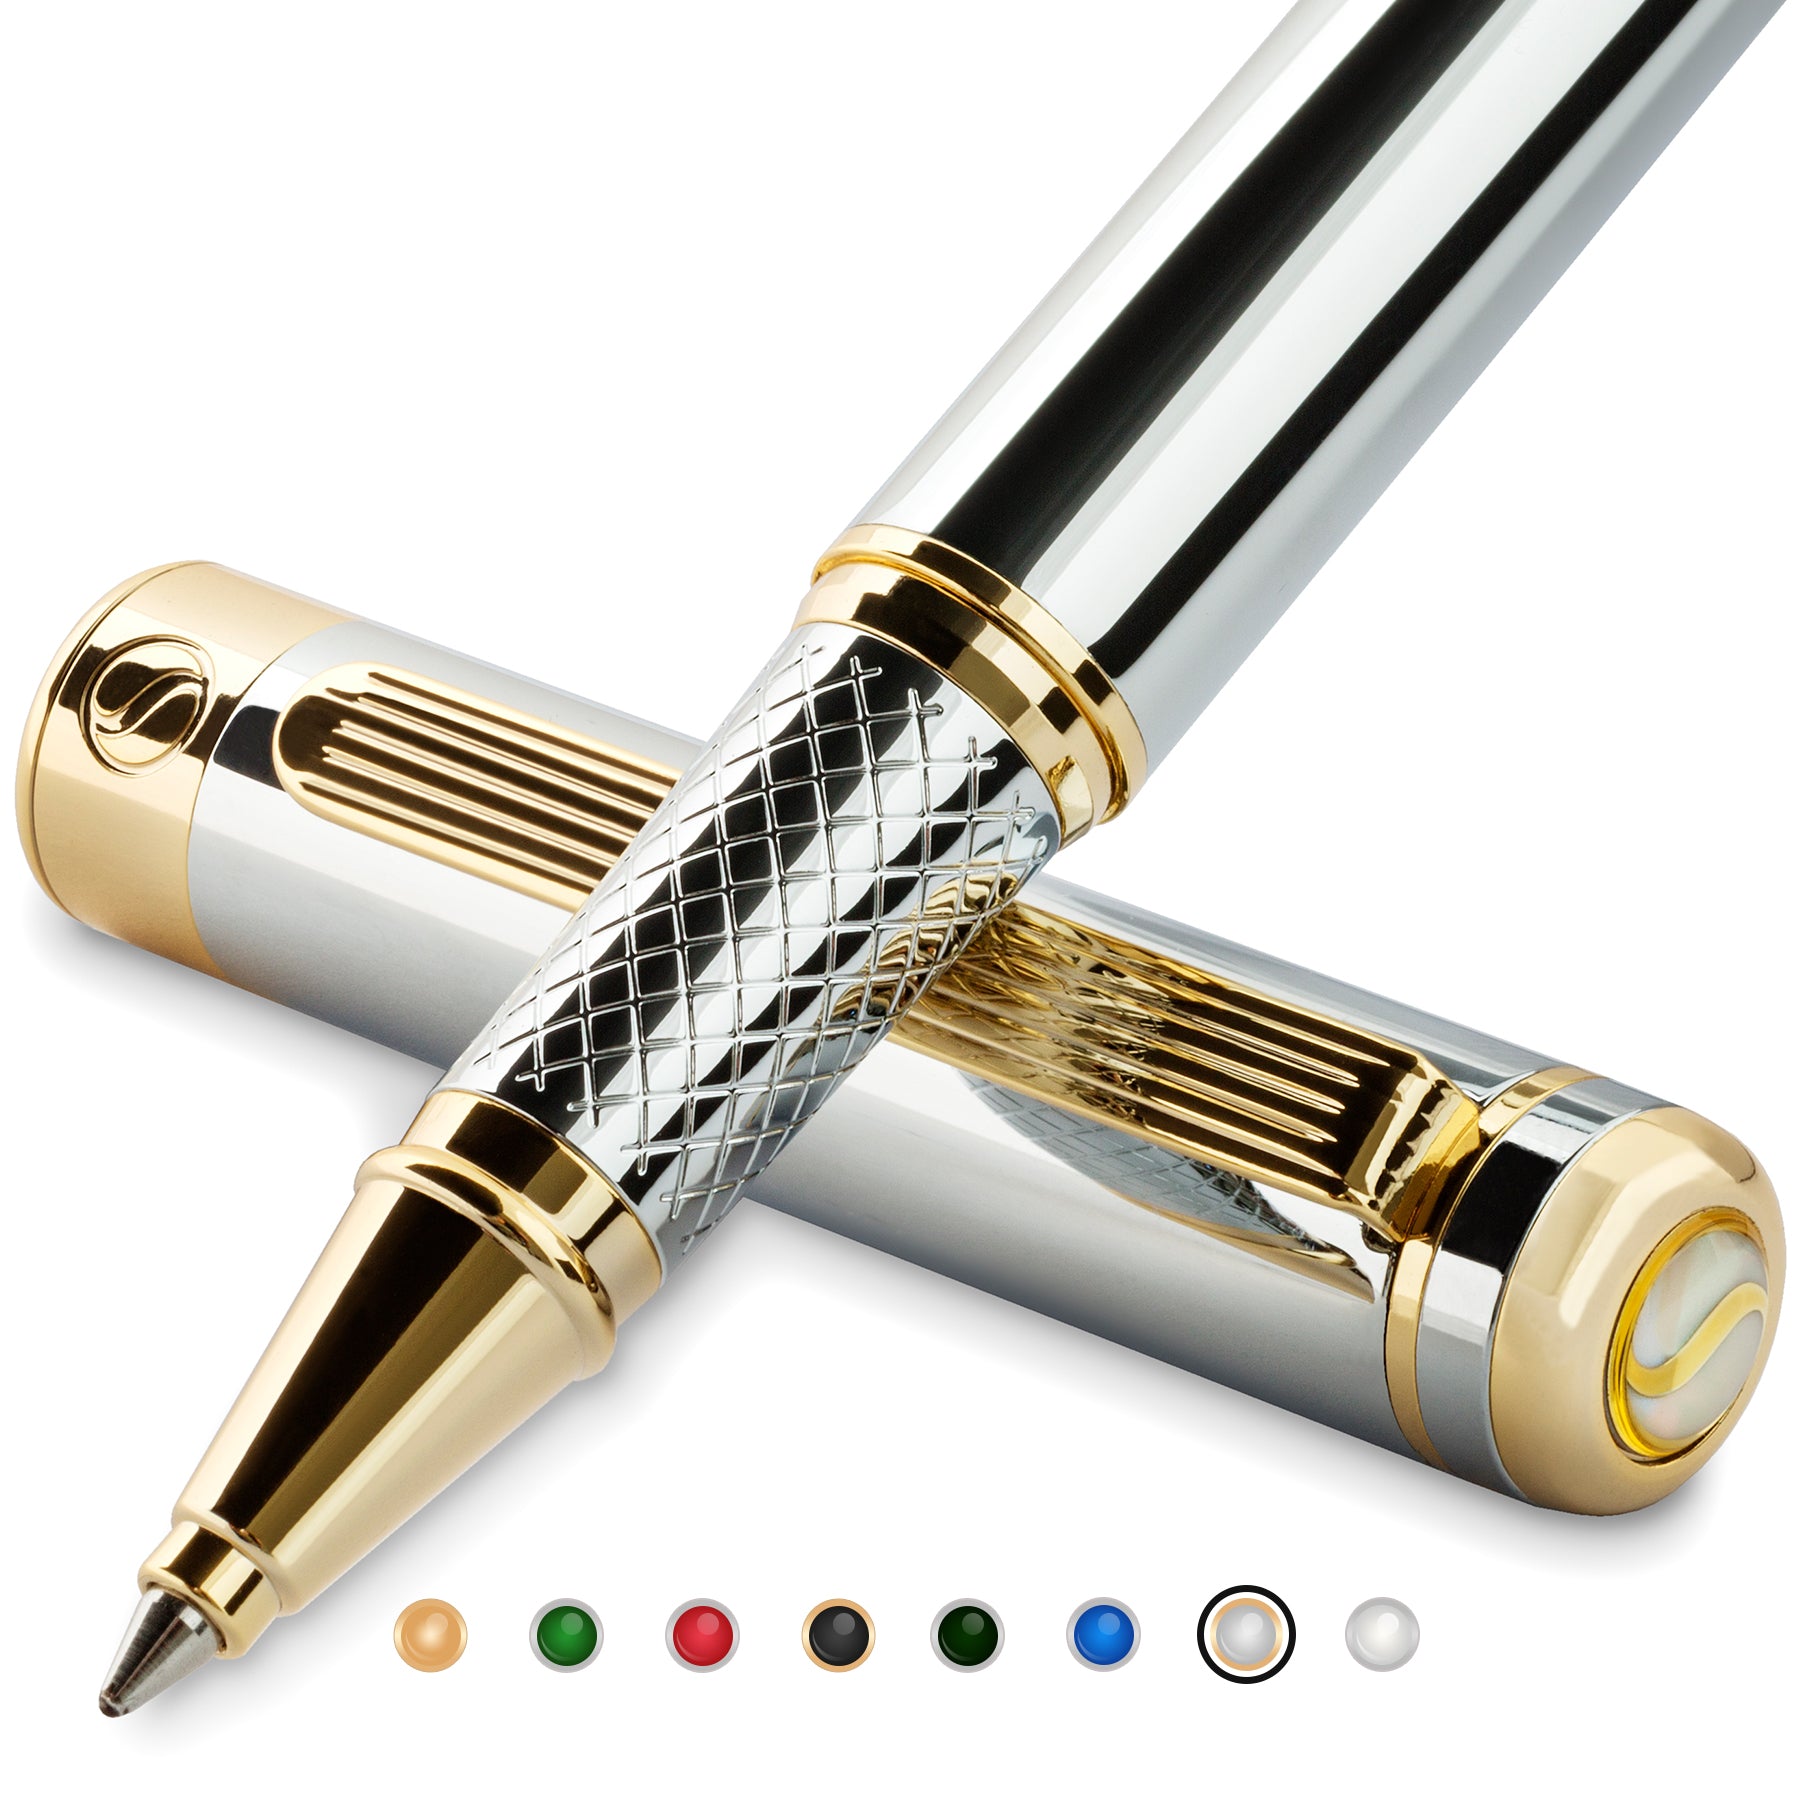 Scriveiner Classic Silver Chrome Rollerball Pen